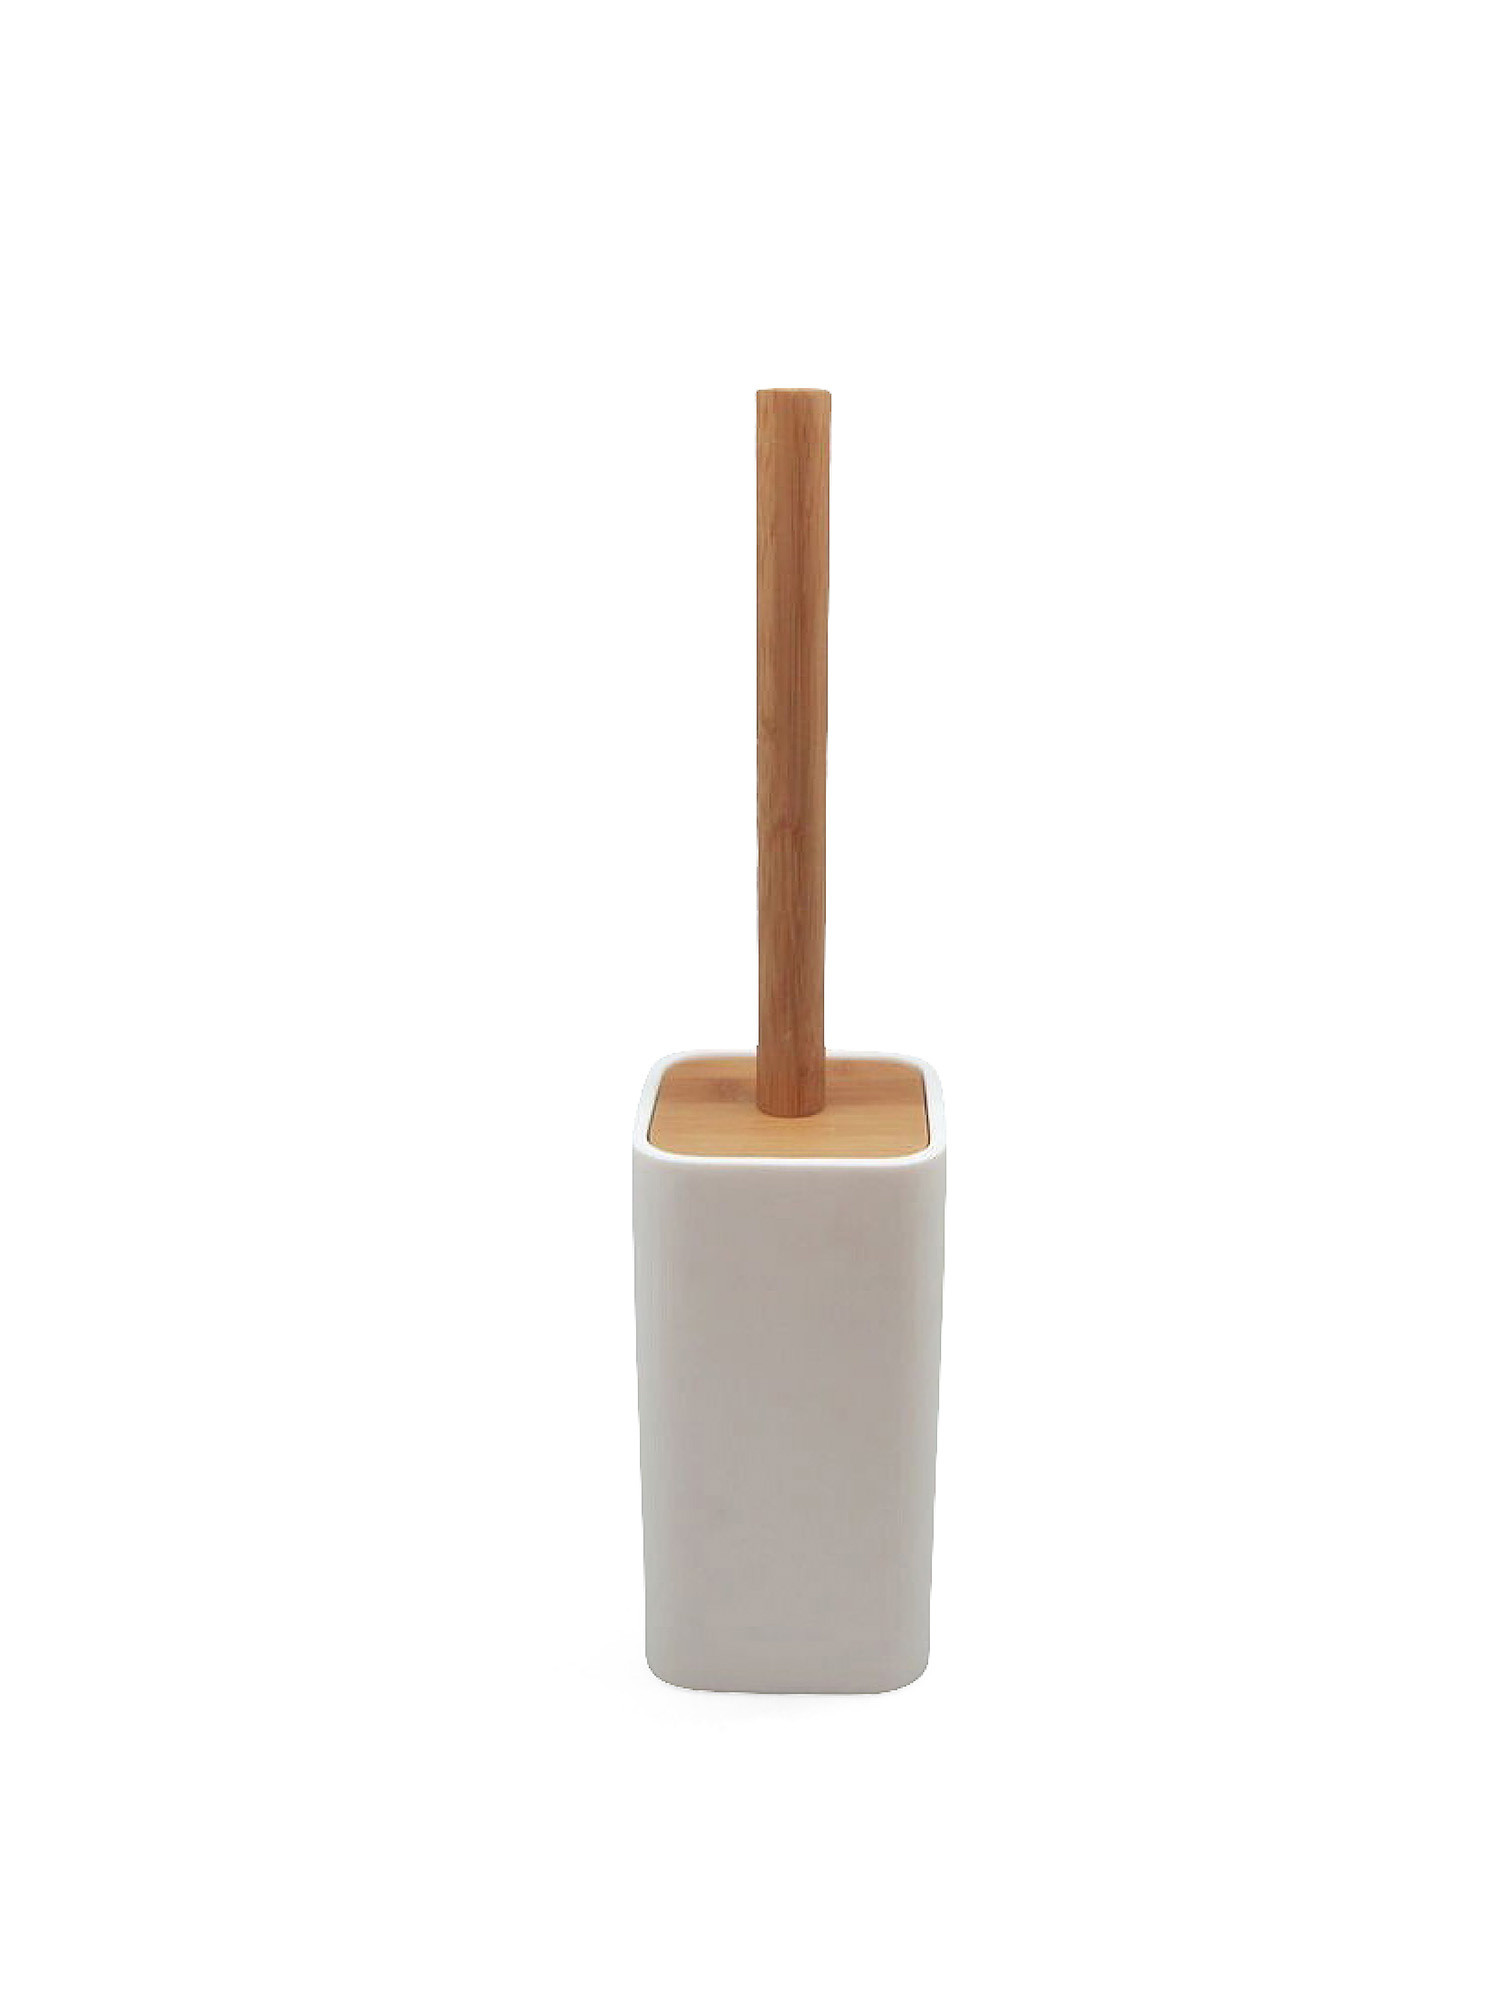 Linea toilet brush holder with bamboo detail, White, large image number 0